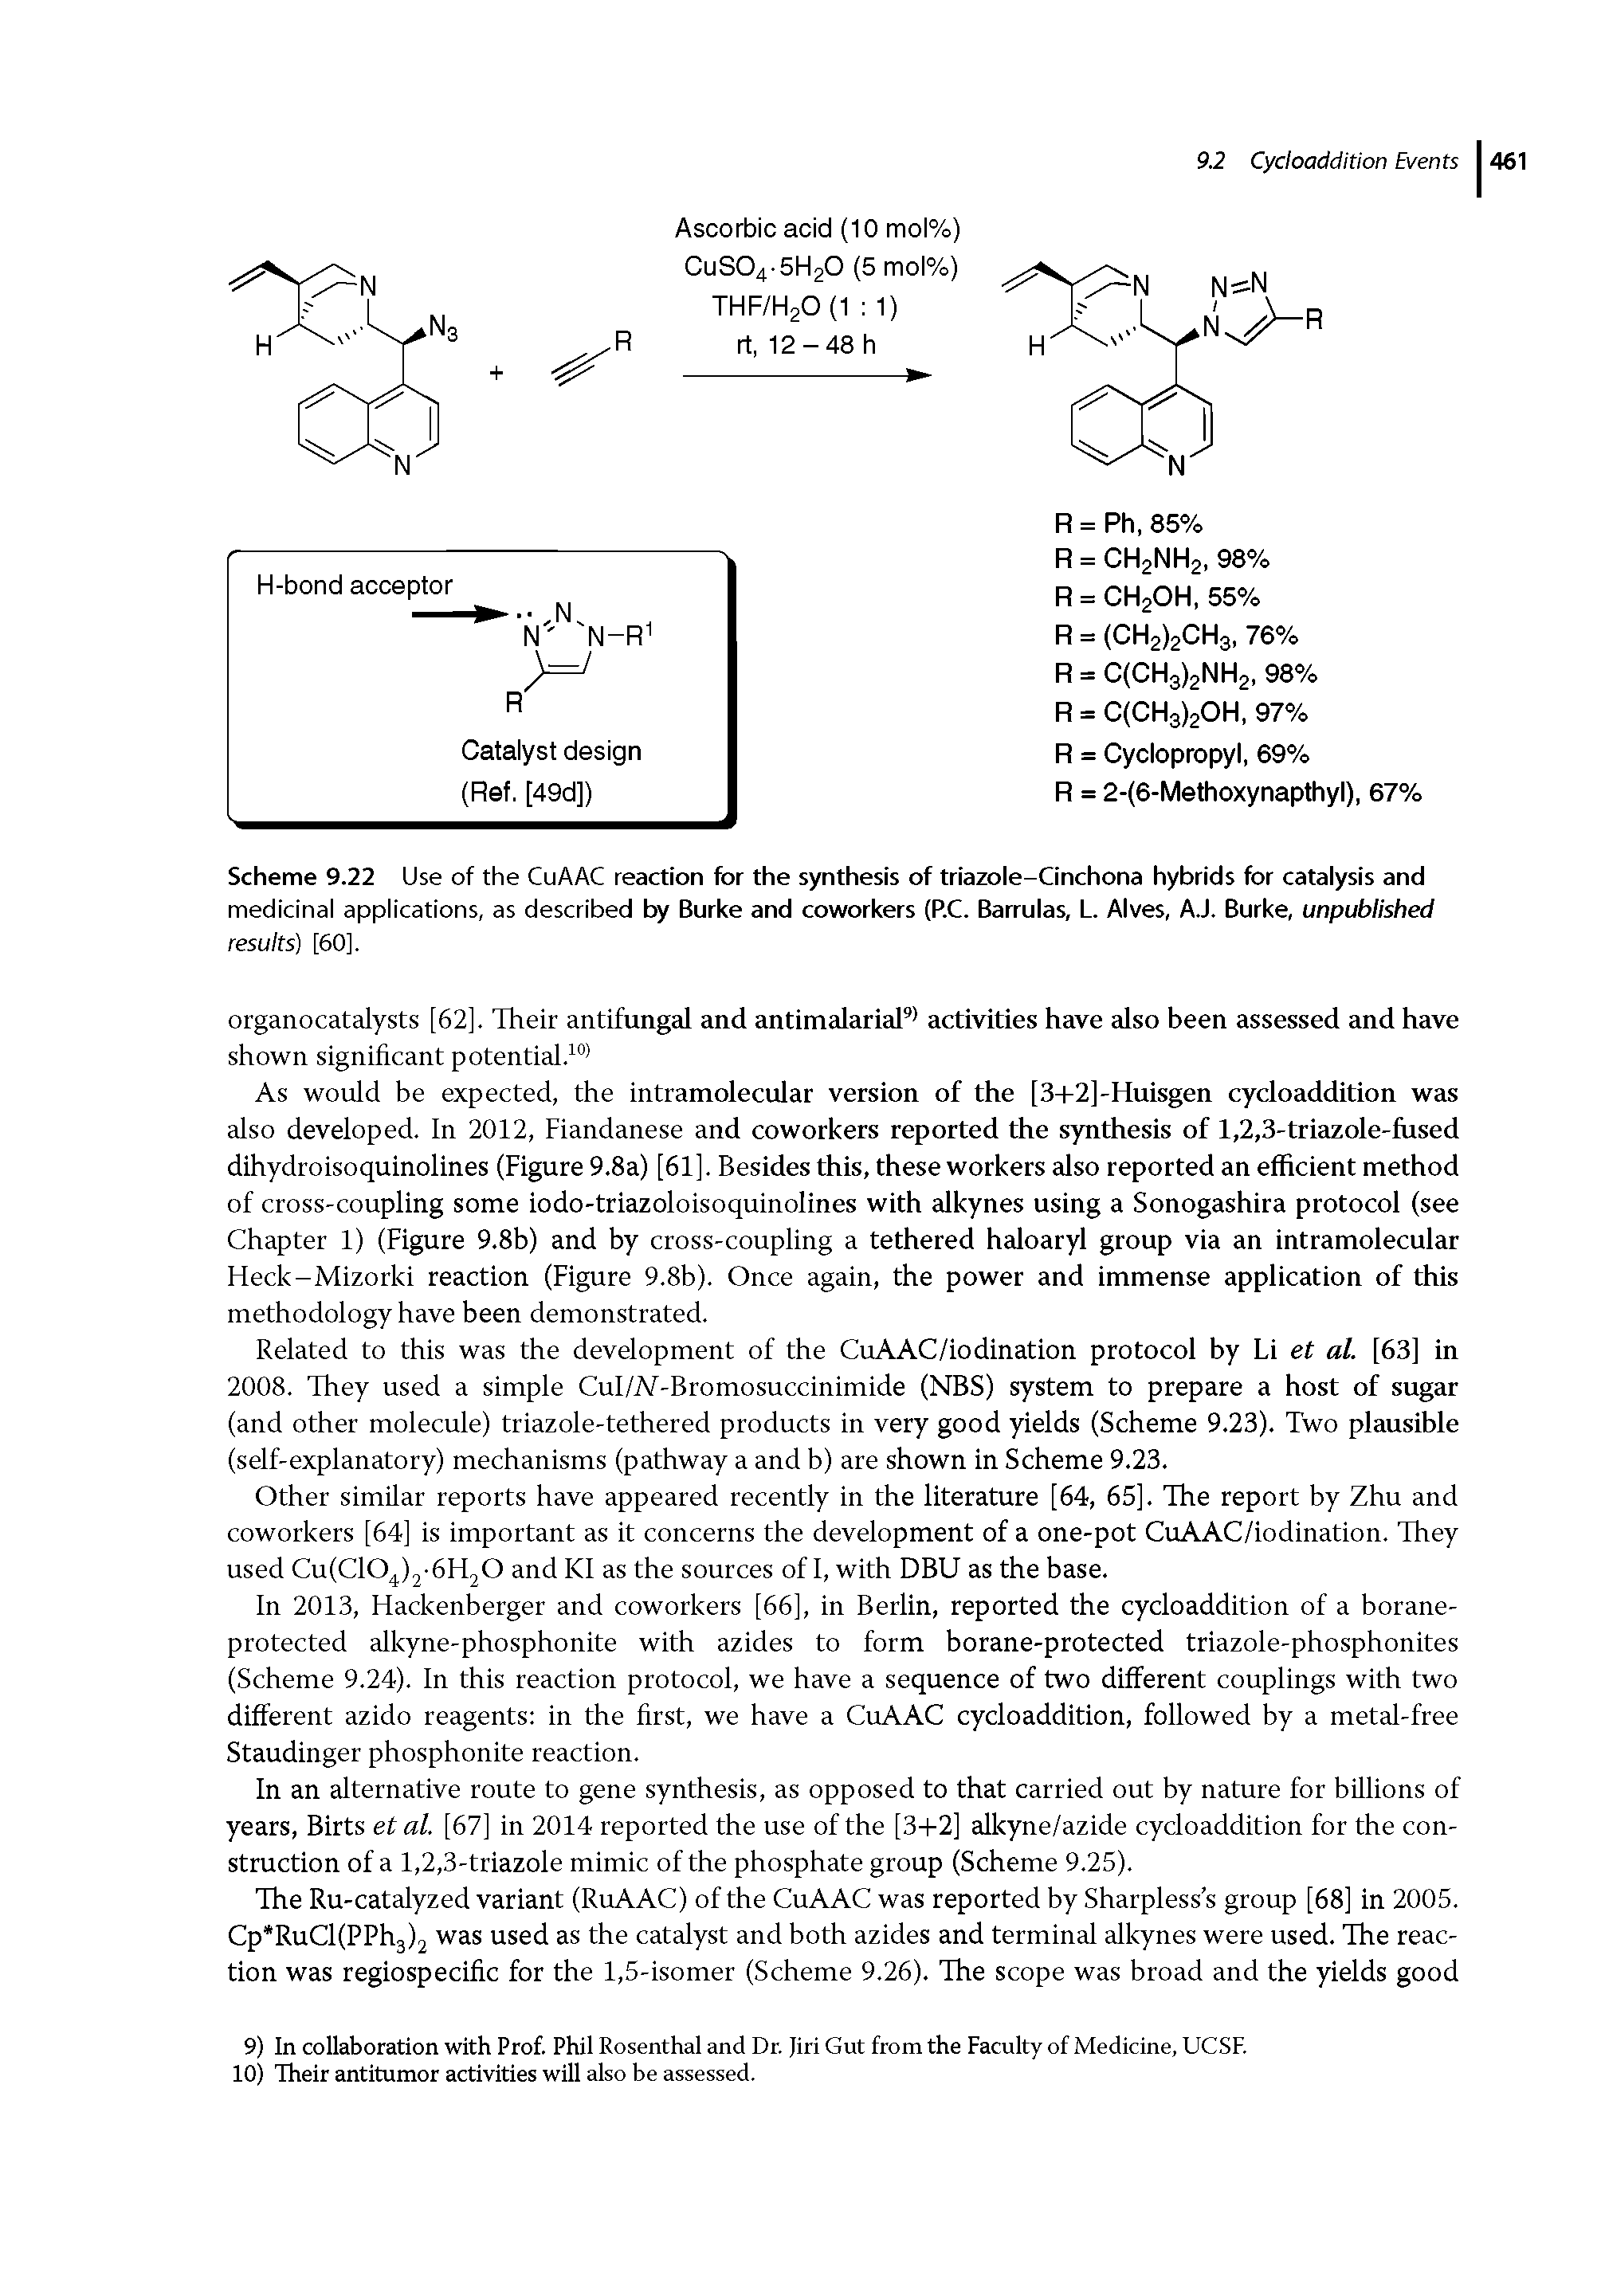 Scheme 9.22 Use of the CuAAC reaction for the synthesis of triazole-Cinchona hybrids for catalysis and medicinal applications, as described by Burke and coworkers (P.C. Barrulas, L. Alves, AJ. Burke, unpMished results) [60],...